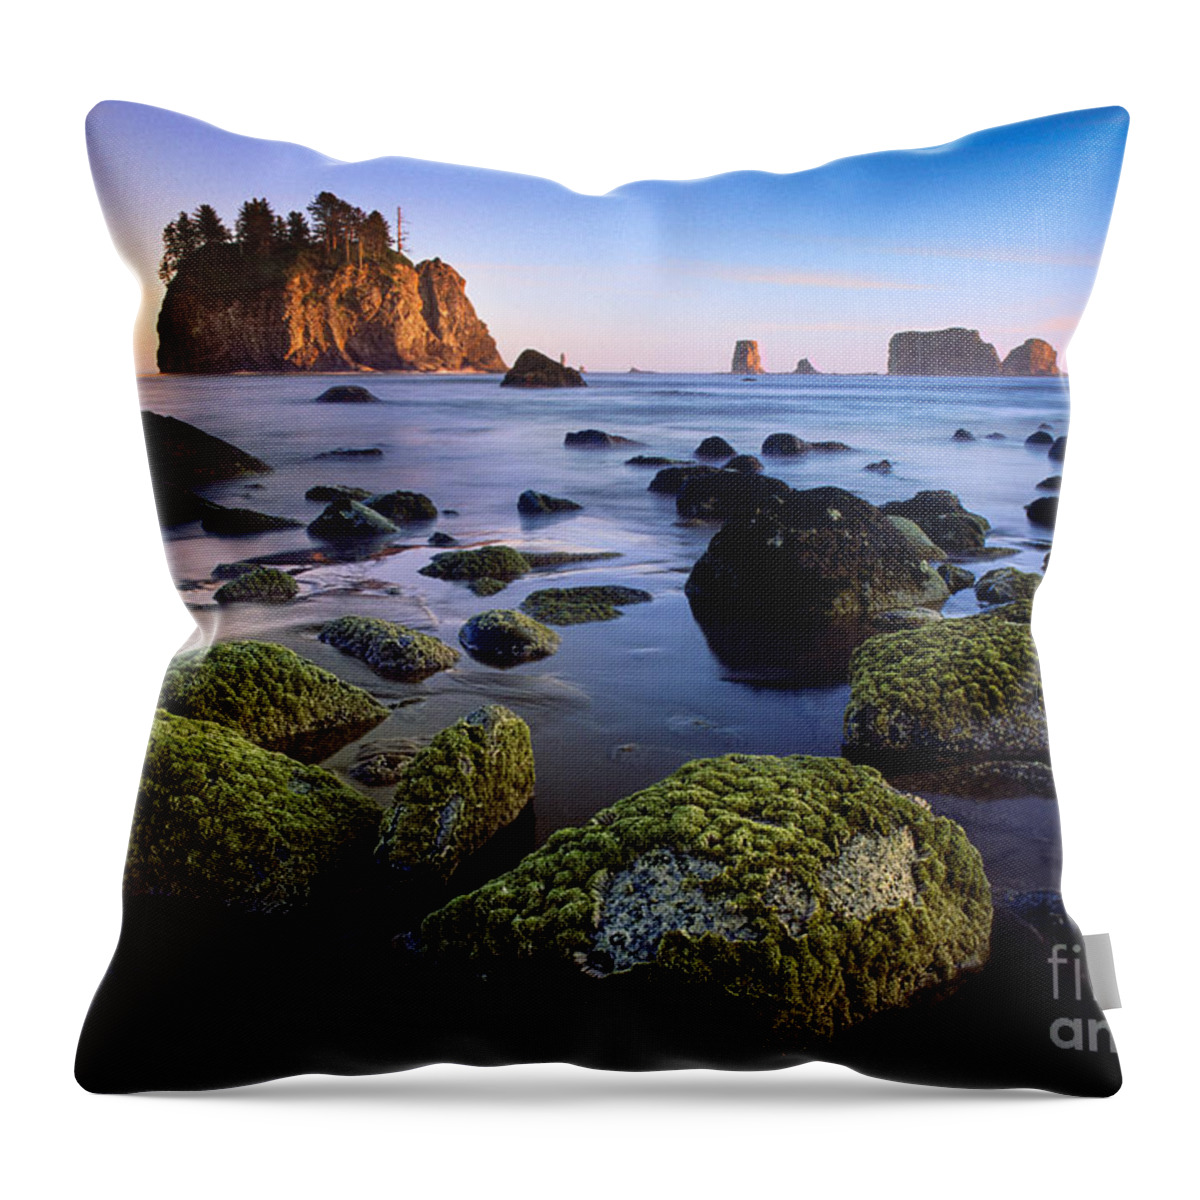 America Throw Pillow featuring the photograph Low Tide at Second Beach by Inge Johnsson